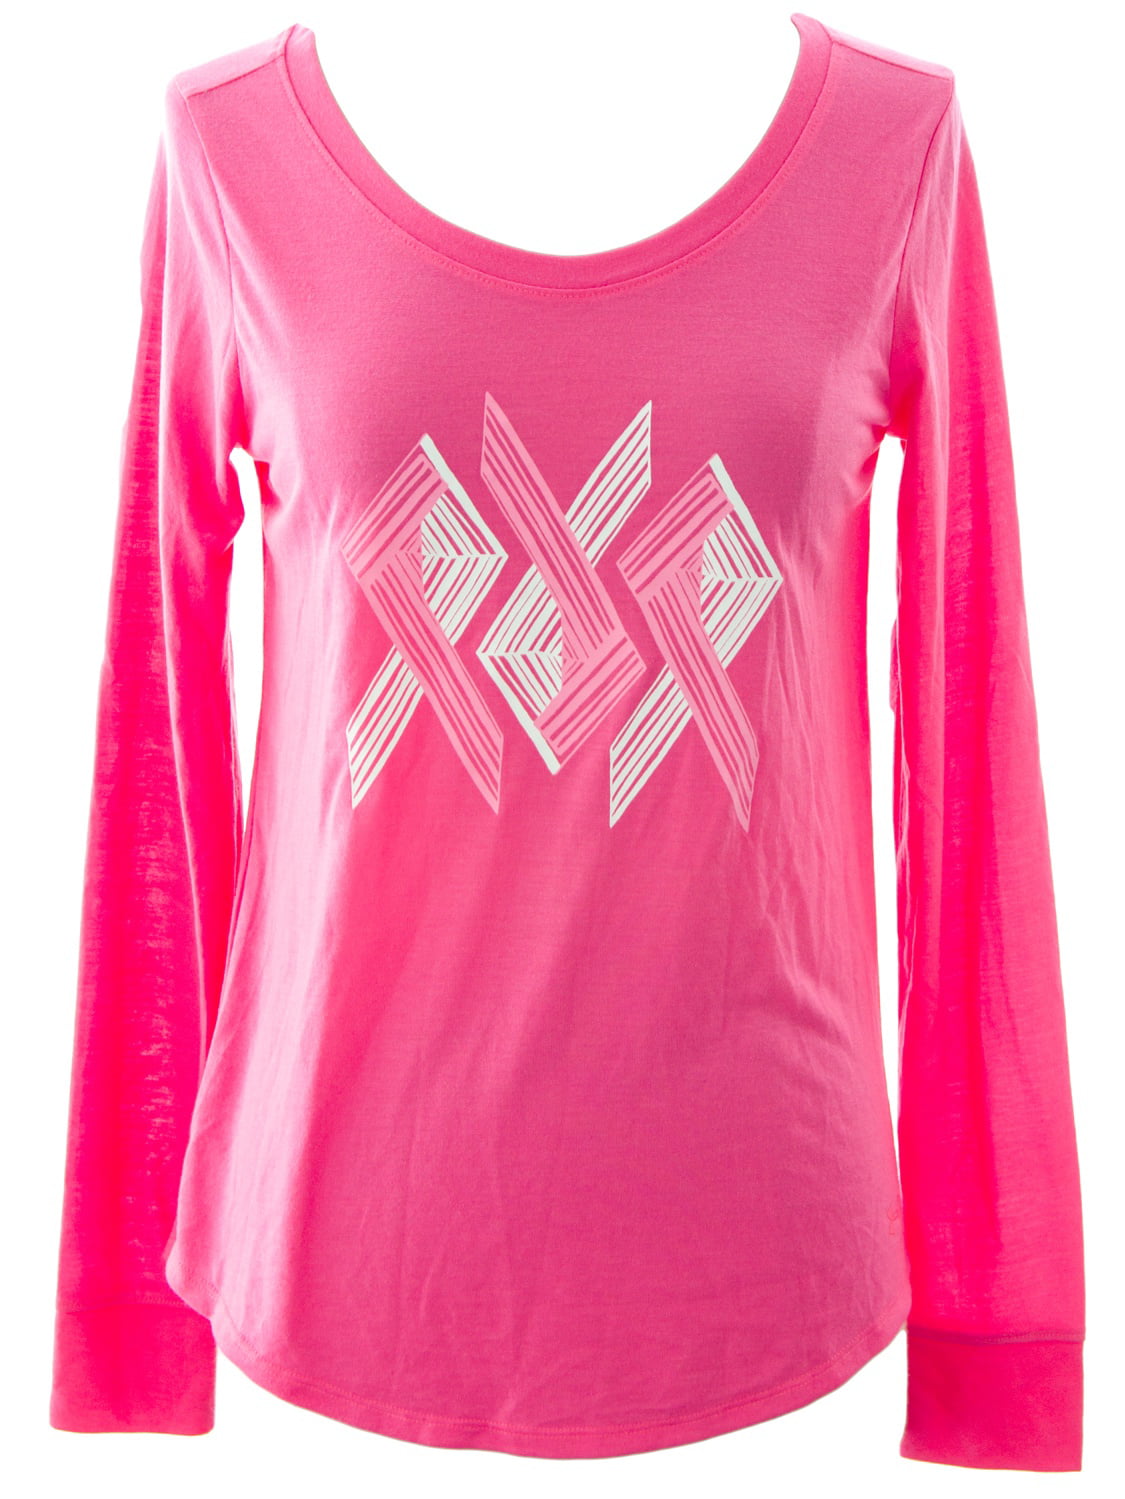 Tanks OR Accessories Under Armour Men,Women or Girls' "Power In Pink" Shirts 